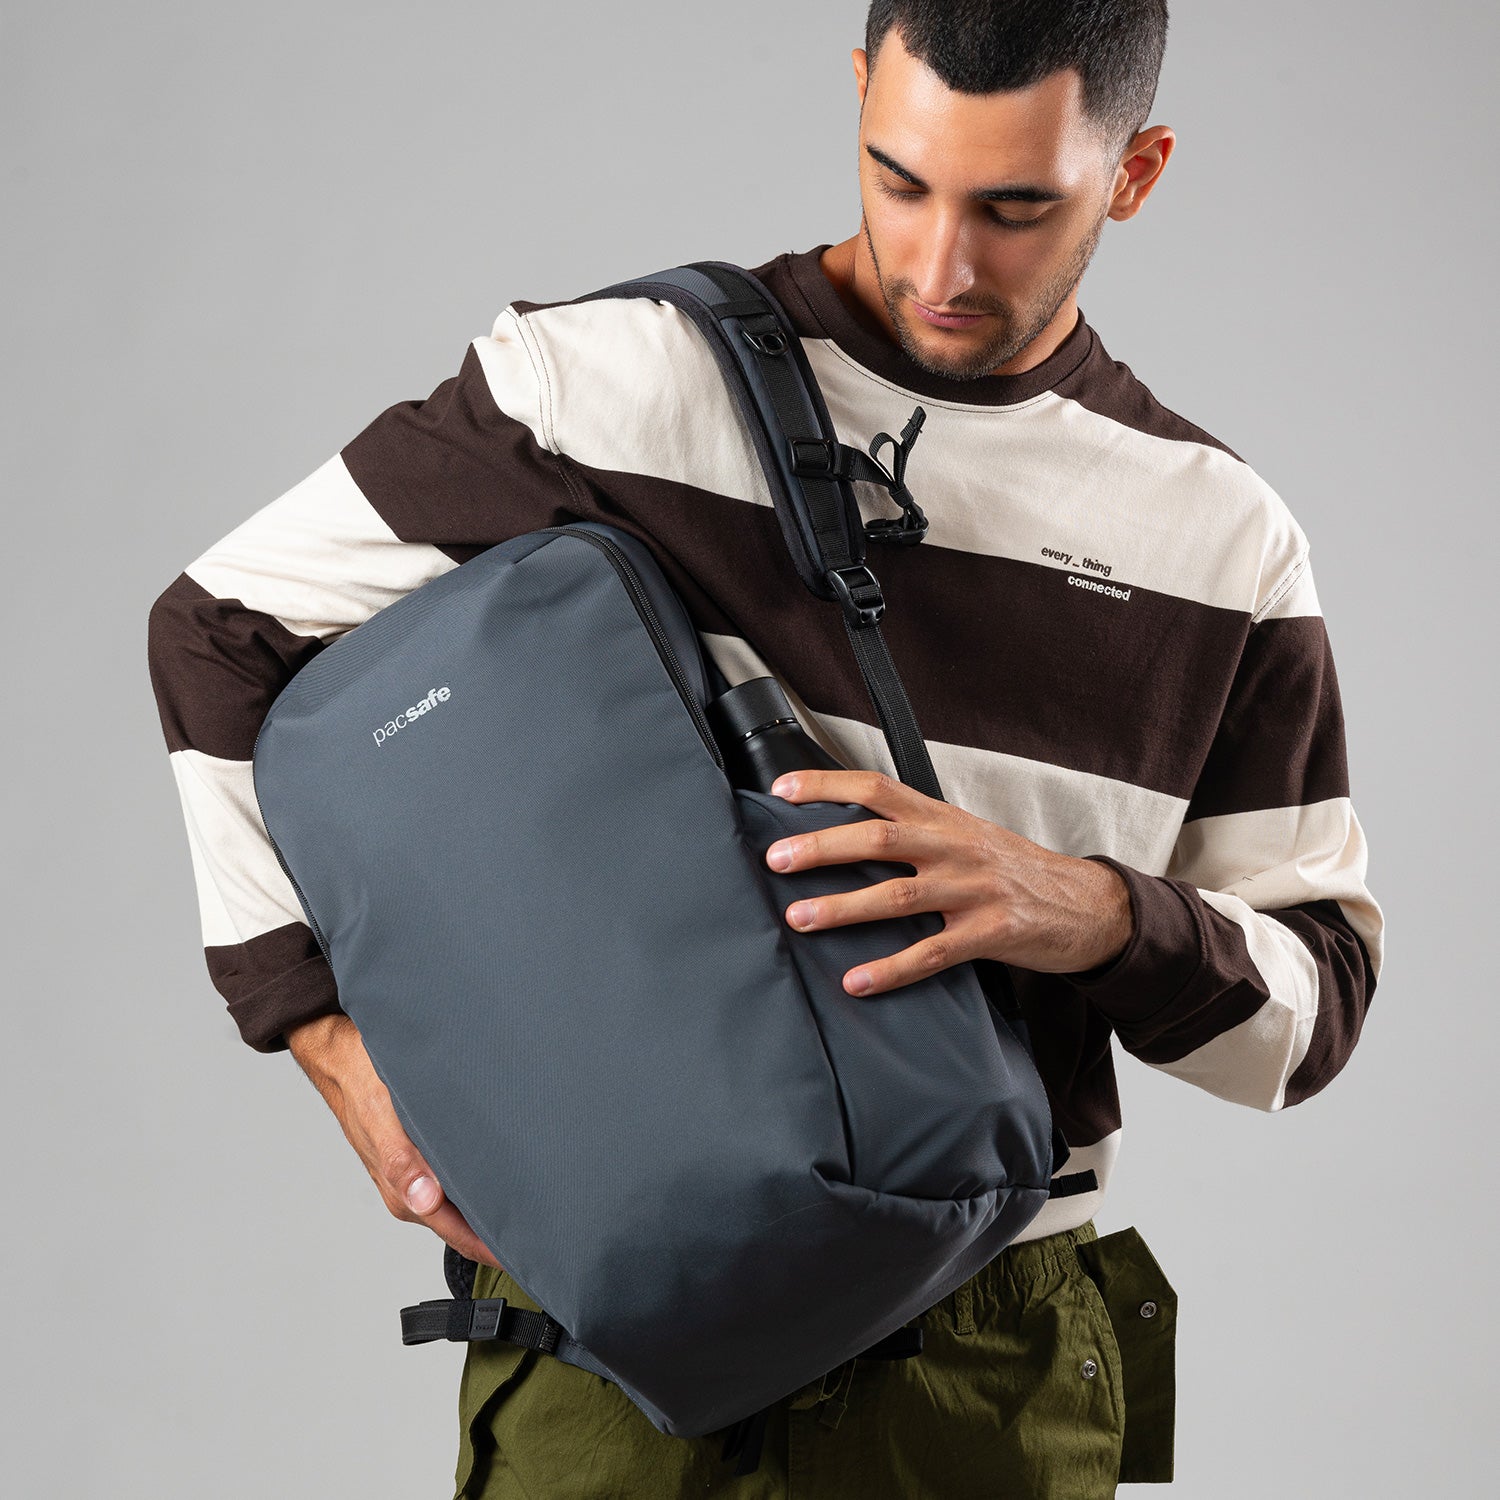 Buy Travel Backpacks Online, With Anti-Theft Features